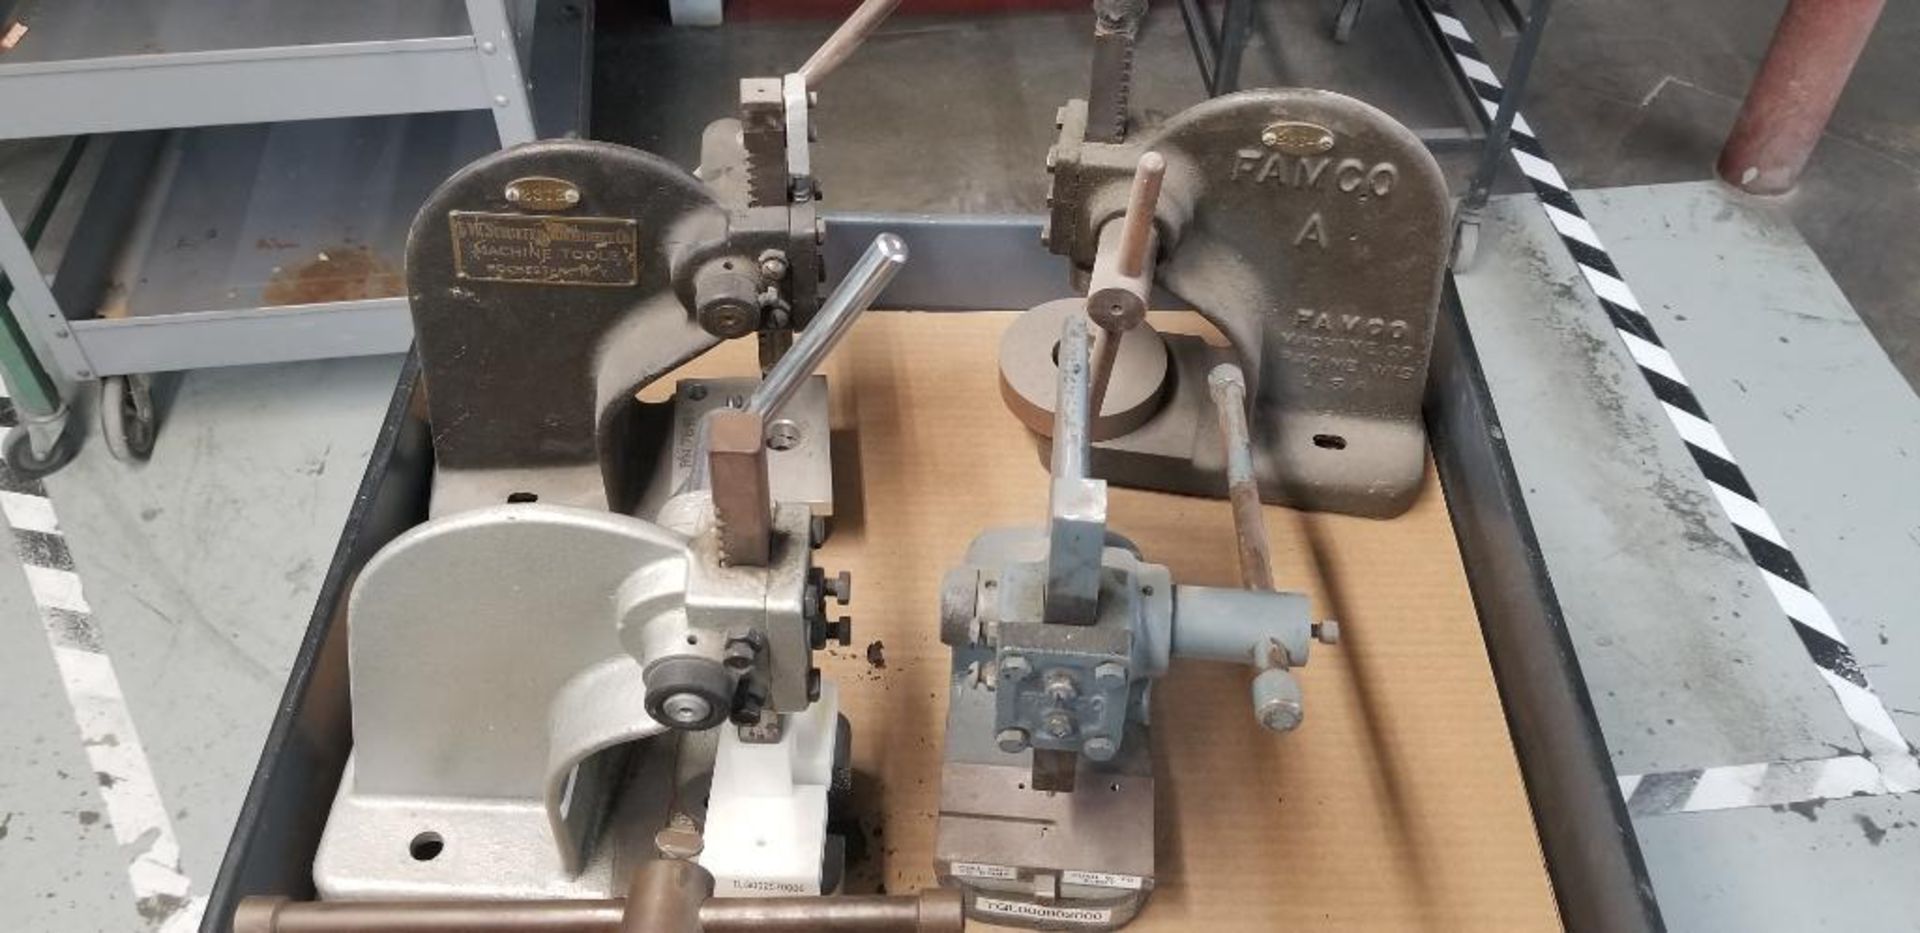 (6x) Famco Benchtop Arbor Presses - Image 2 of 3